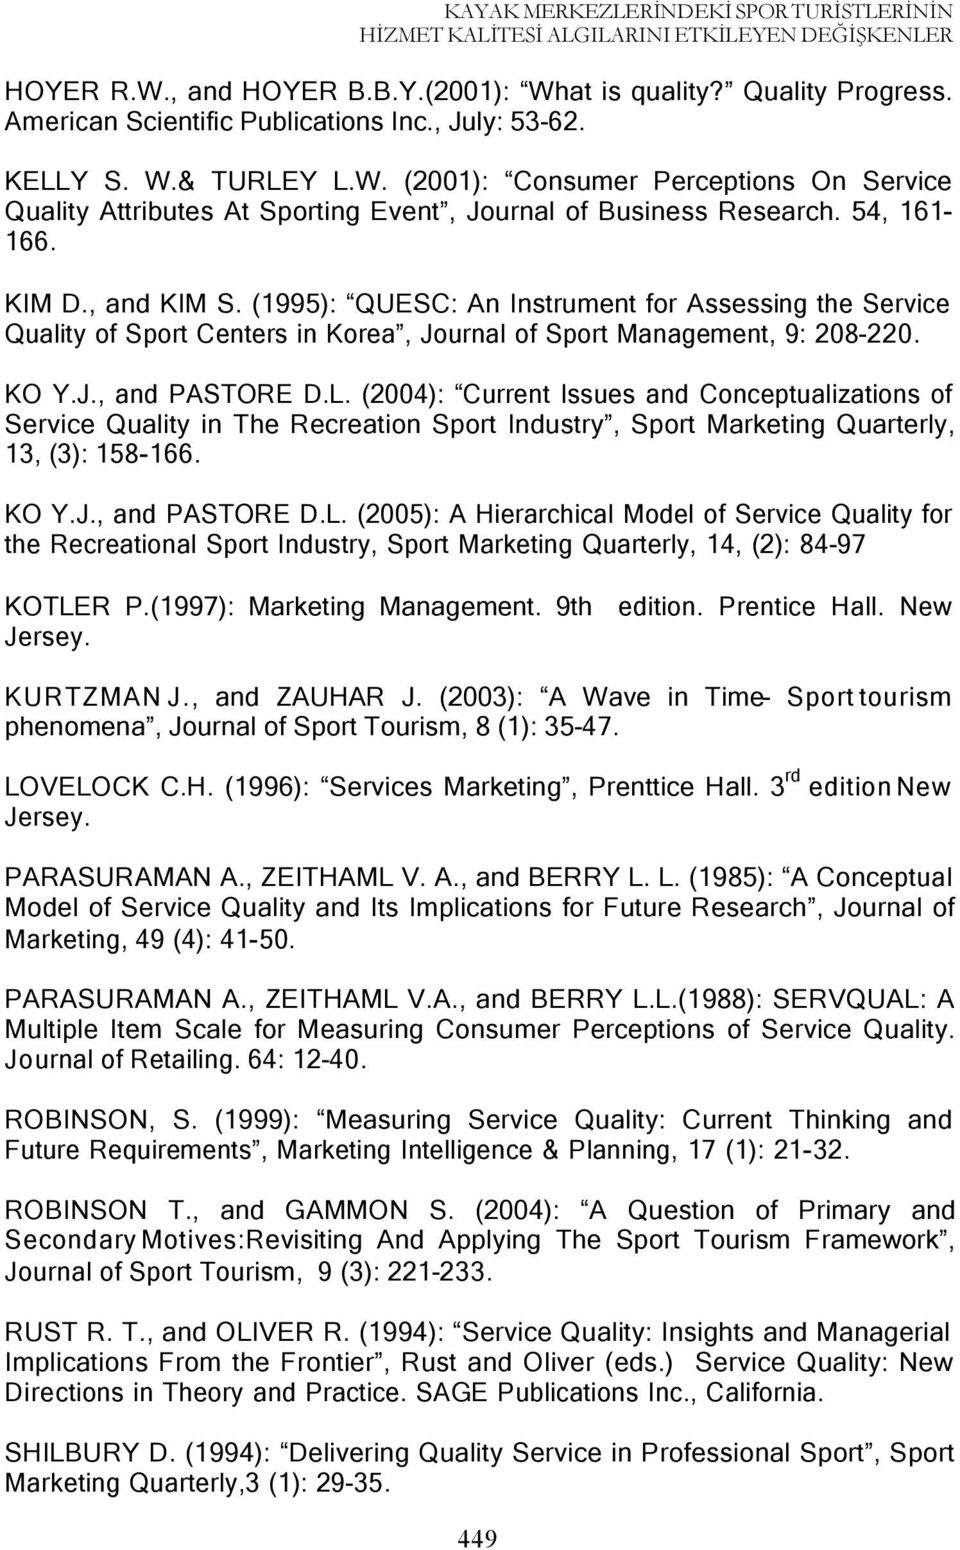 (1995): QUESC: An Instrument for Assessing the Service Quality of Sport Centers in Korea, Journal of Sport Management, 9: 208-220. KO Y.J., and PASTORE D.L.